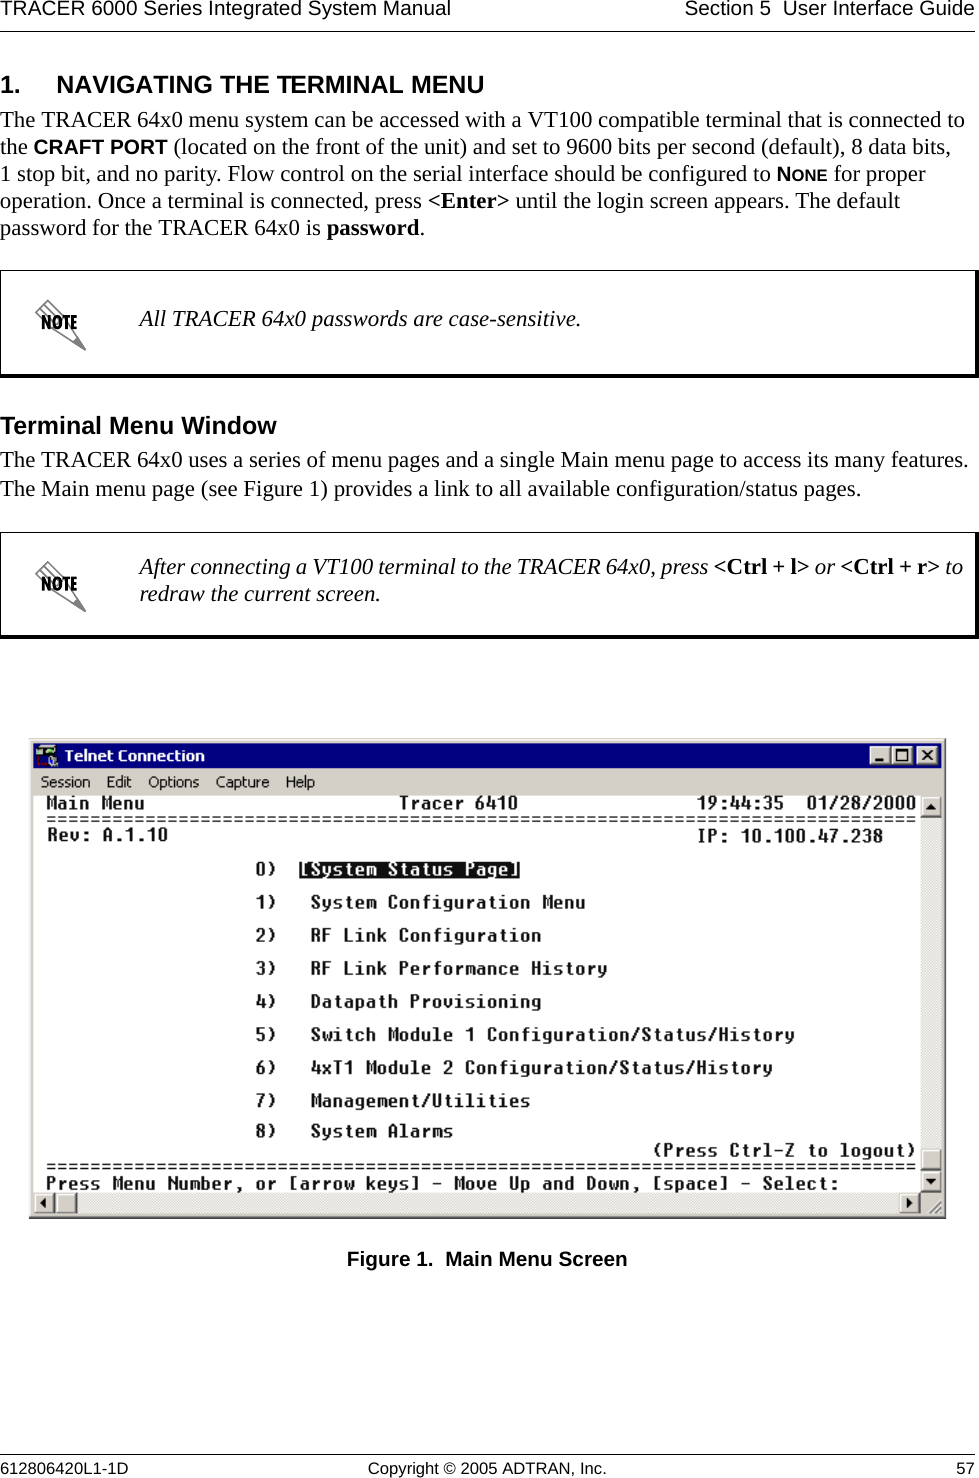 TRACER 6000 Series Integrated System Manual Section 5  User Interface Guide612806420L1-1D Copyright © 2005 ADTRAN, Inc. 571. NAVIGATING THE TERMINAL MENUThe TRACER 64x0 menu system can be accessed with a VT100 compatible terminal that is connected to the CRAFT PORT (located on the front of the unit) and set to 9600 bits per second (default), 8 data bits, 1 stop bit, and no parity. Flow control on the serial interface should be configured to NONE for proper operation. Once a terminal is connected, press &lt;Enter&gt; until the login screen appears. The default password for the TRACER 64x0 is password.Terminal Menu WindowThe TRACER 64x0 uses a series of menu pages and a single Main menu page to access its many features. The Main menu page (see Figure 1) provides a link to all available configuration/status pages.Figure 1.  Main Menu ScreenAll TRACER 64x0 passwords are case-sensitive.After connecting a VT100 terminal to the TRACER 64x0, press &lt;Ctrl + l&gt; or &lt;Ctrl + r&gt; to redraw the current screen.